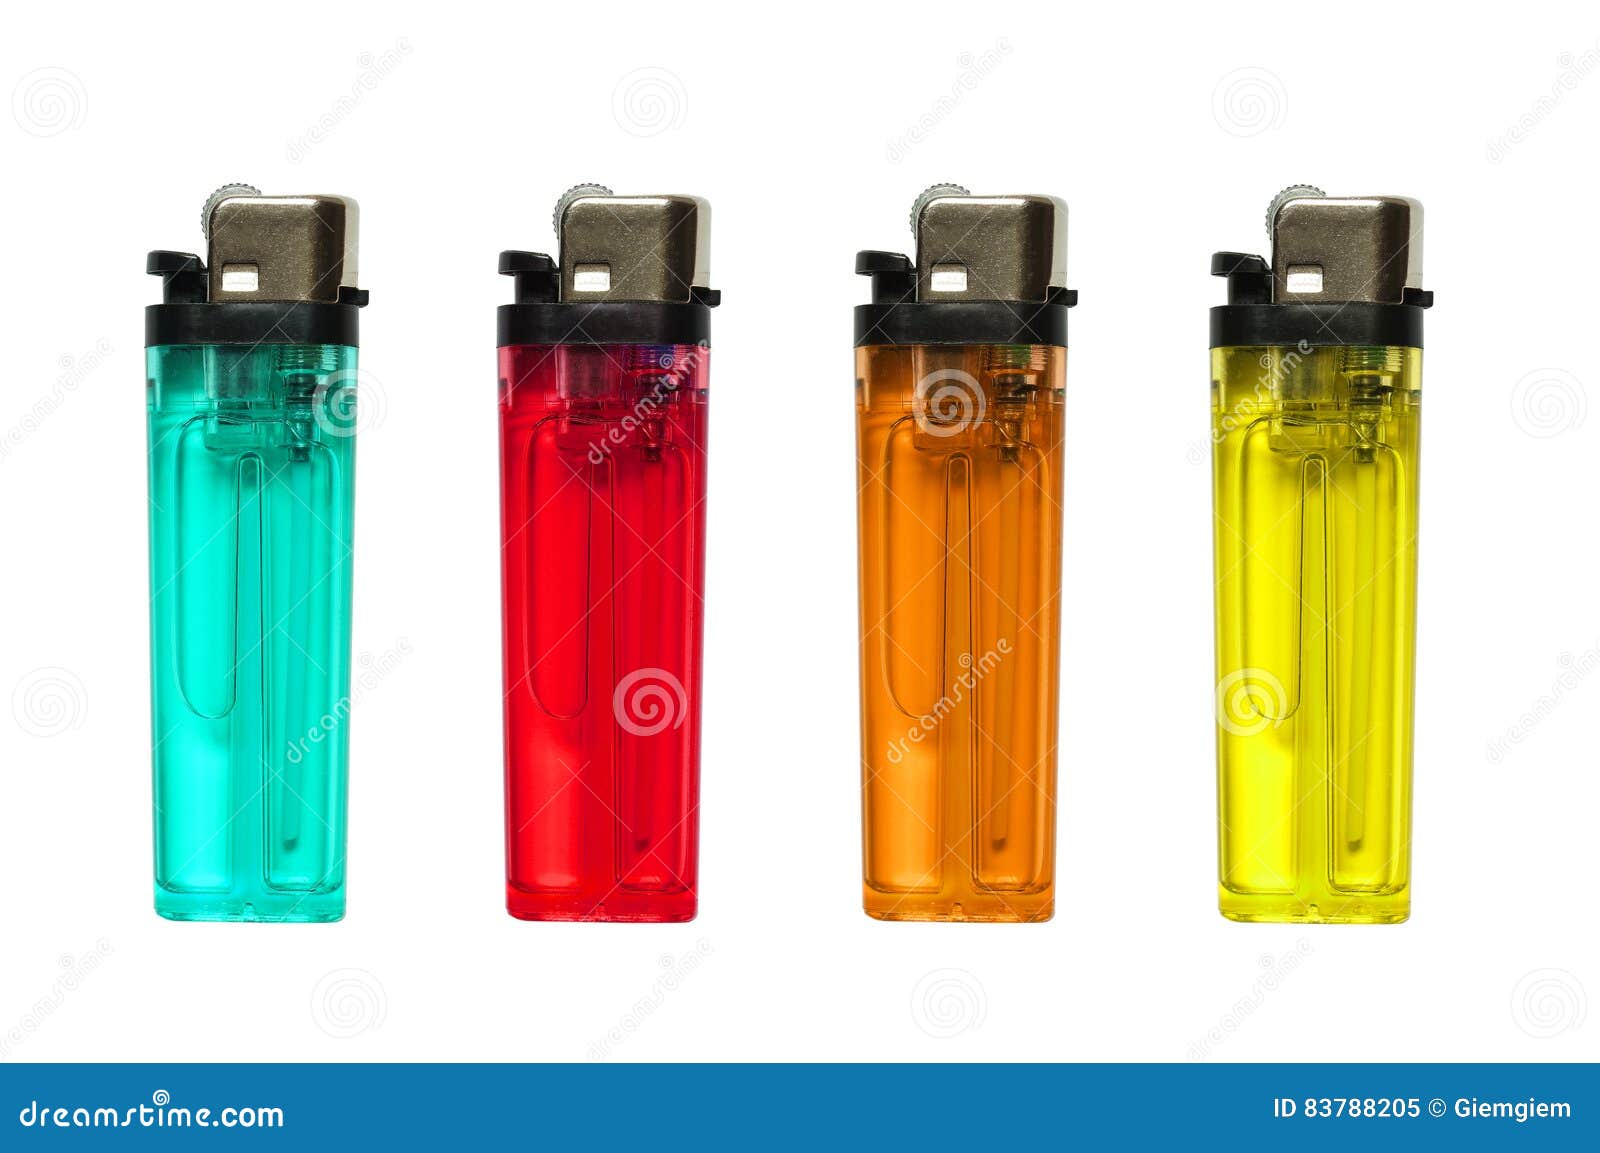 Colored lighters isolated stock image. Image of group - 83788205